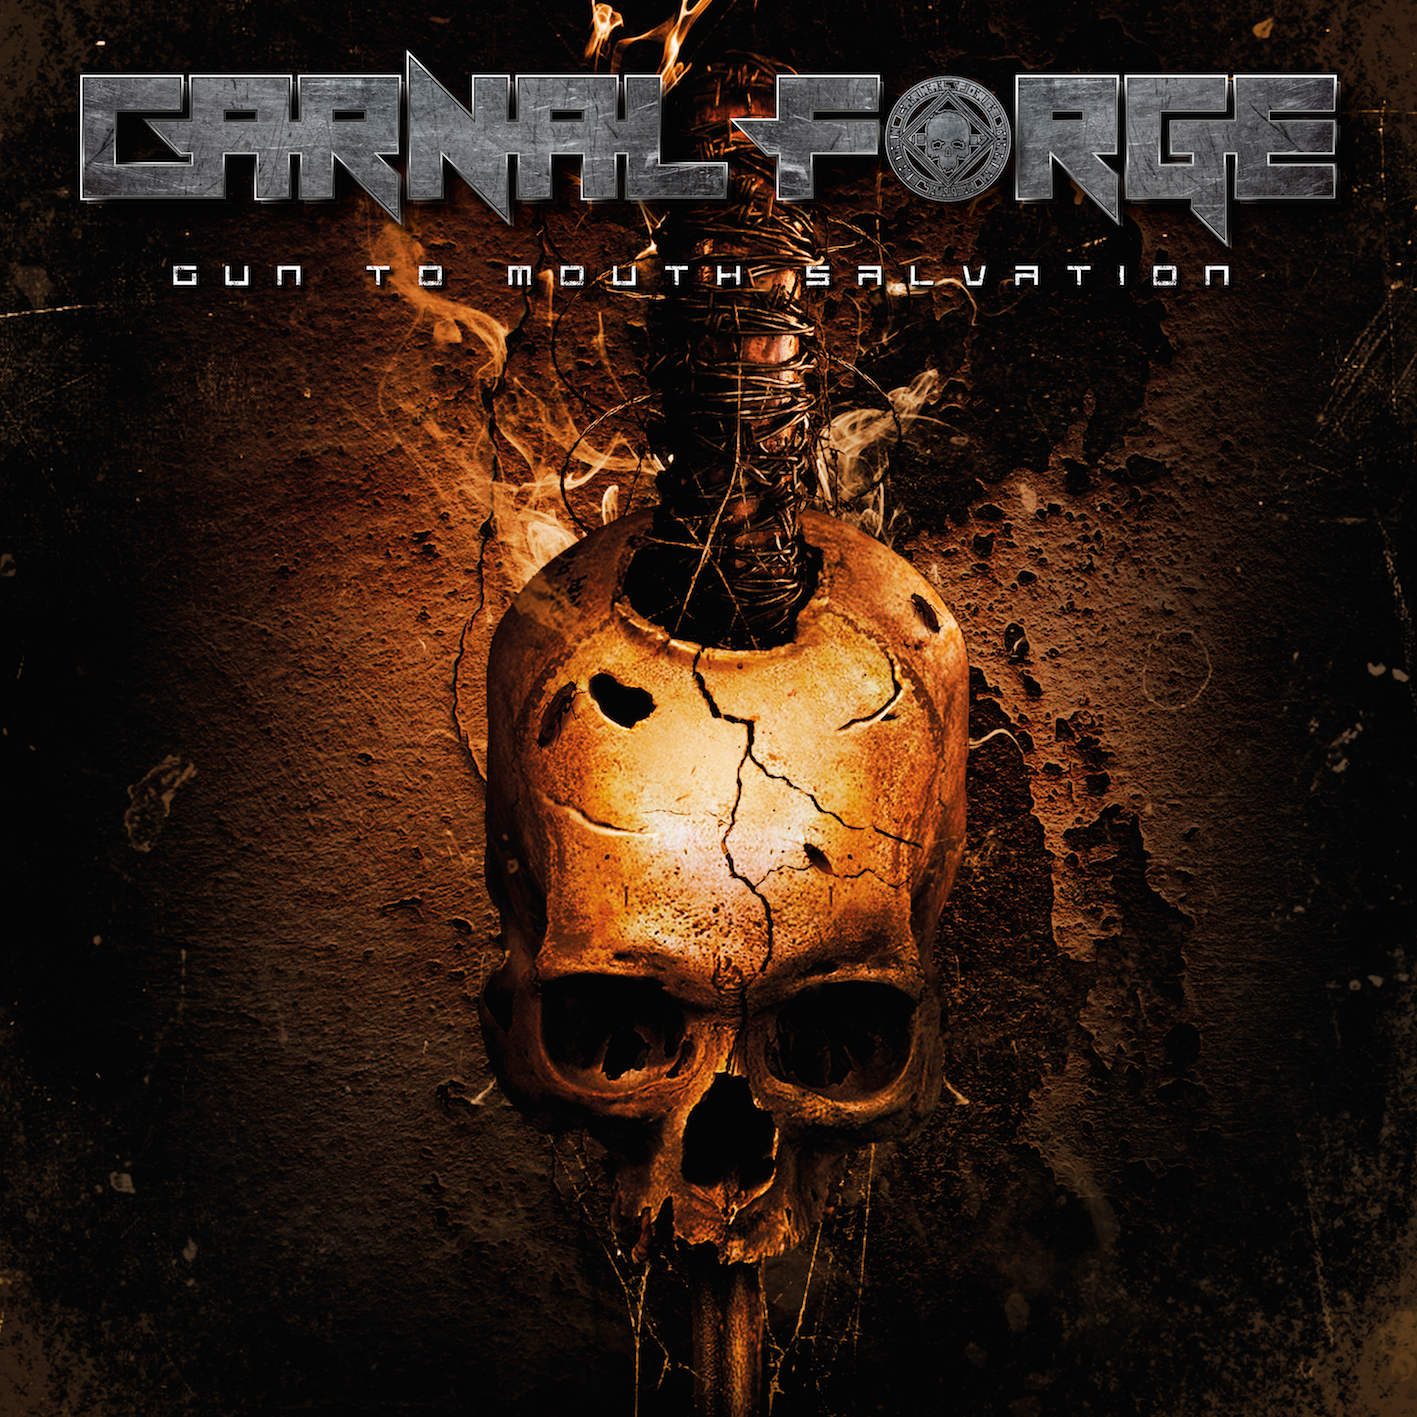 CARNAL FORGE (SWE) – Gun To Mouth Salvation